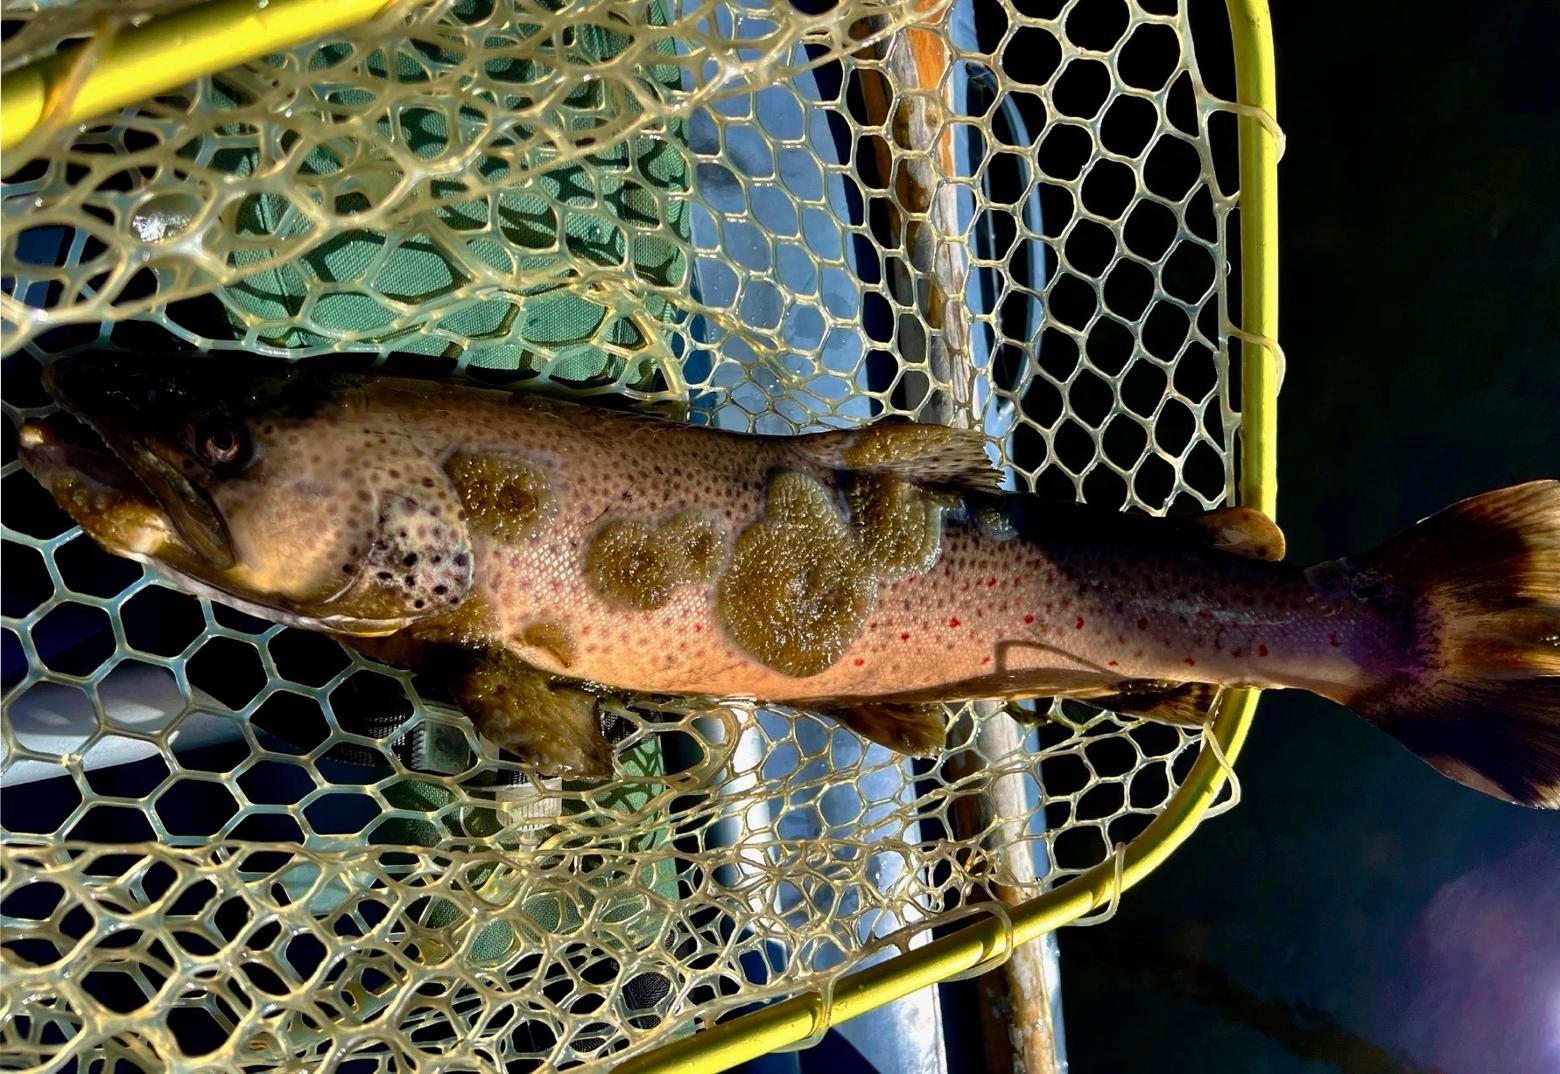 Fungus among us: A brown trout caught this year in Montana's Big Hole River. What kind of a harbinger might it be? Despite a big snow winter, river flows in the West are already dipping fast, setting off a series of fishing restrictions on many of the region's storied trout streams.  Photo by Wade Fellin